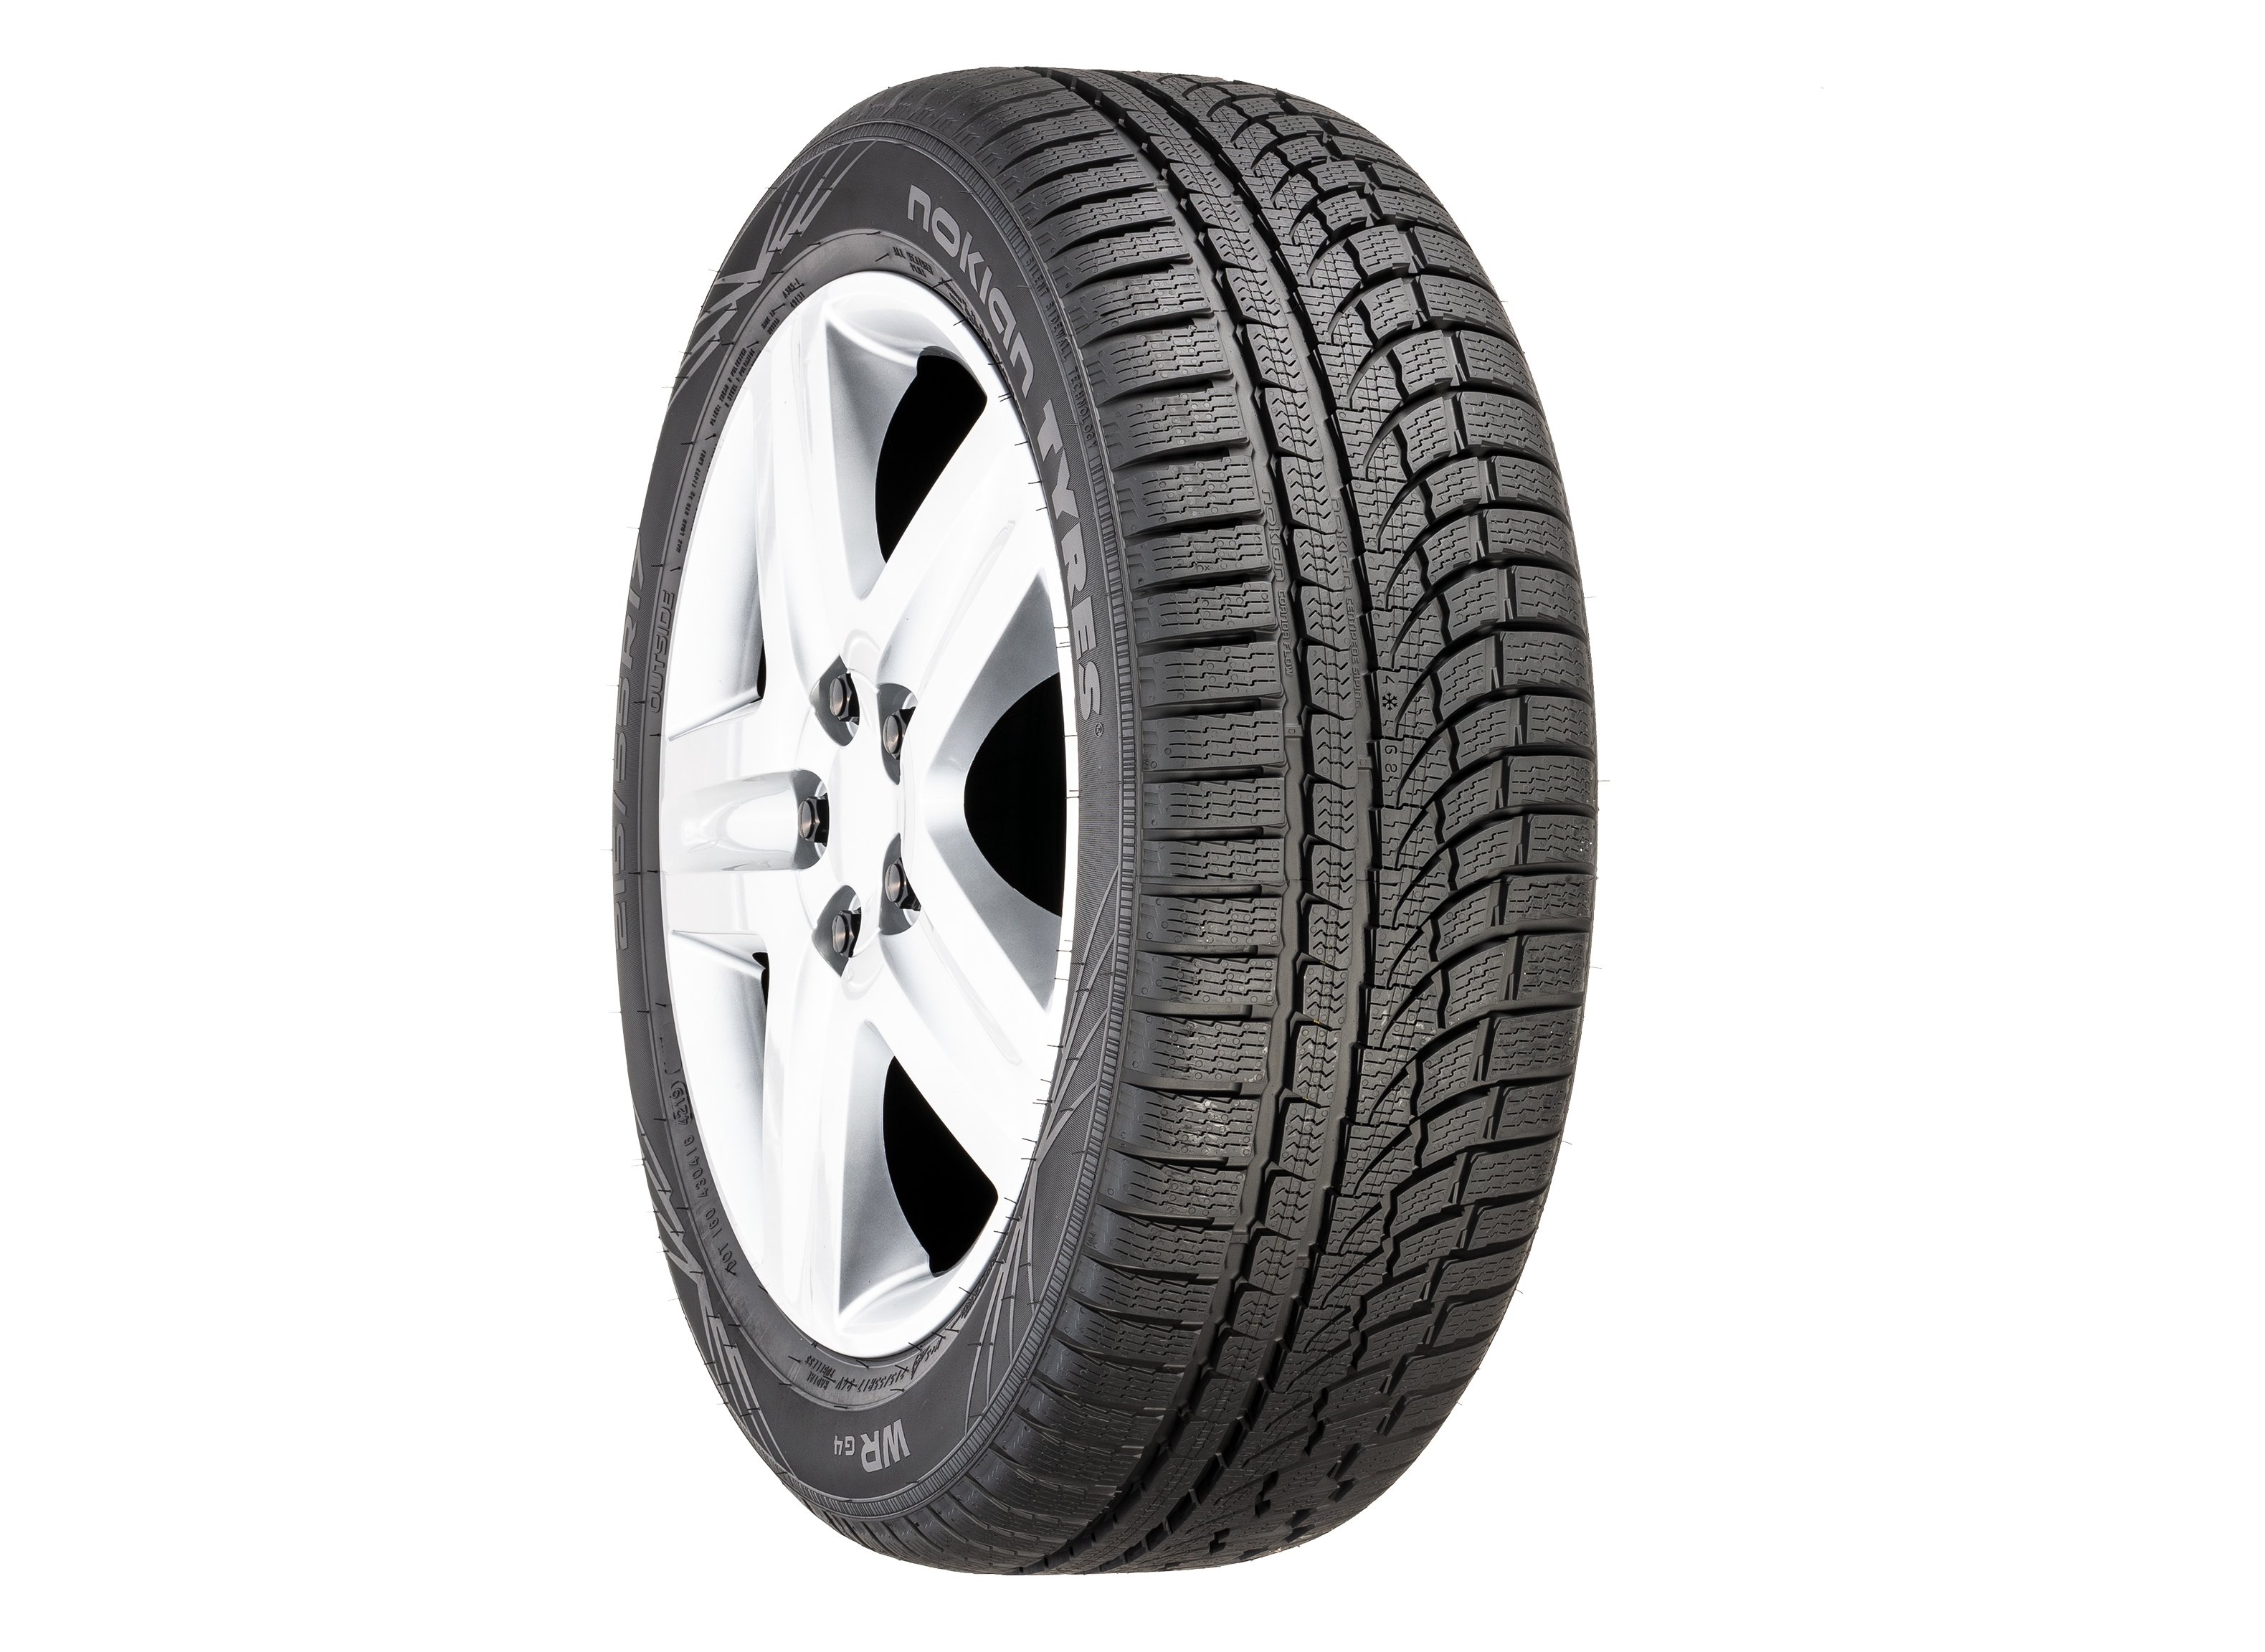 Nokian WRG4 Tire Consumer Reports - Review